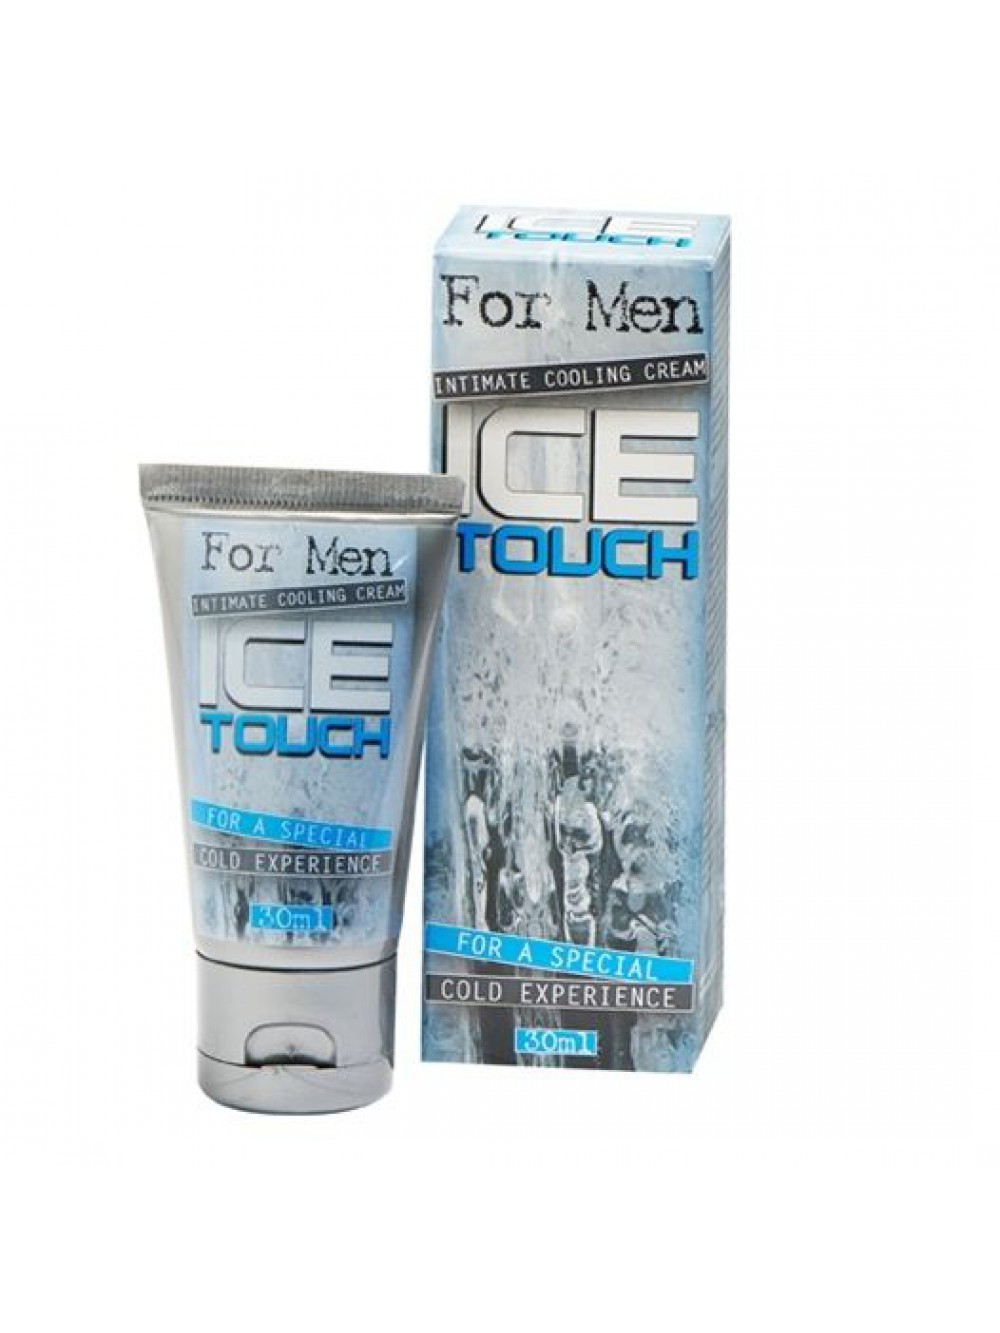 ICE TOUCH INTIMATE COOLING CREAM FOR MEN